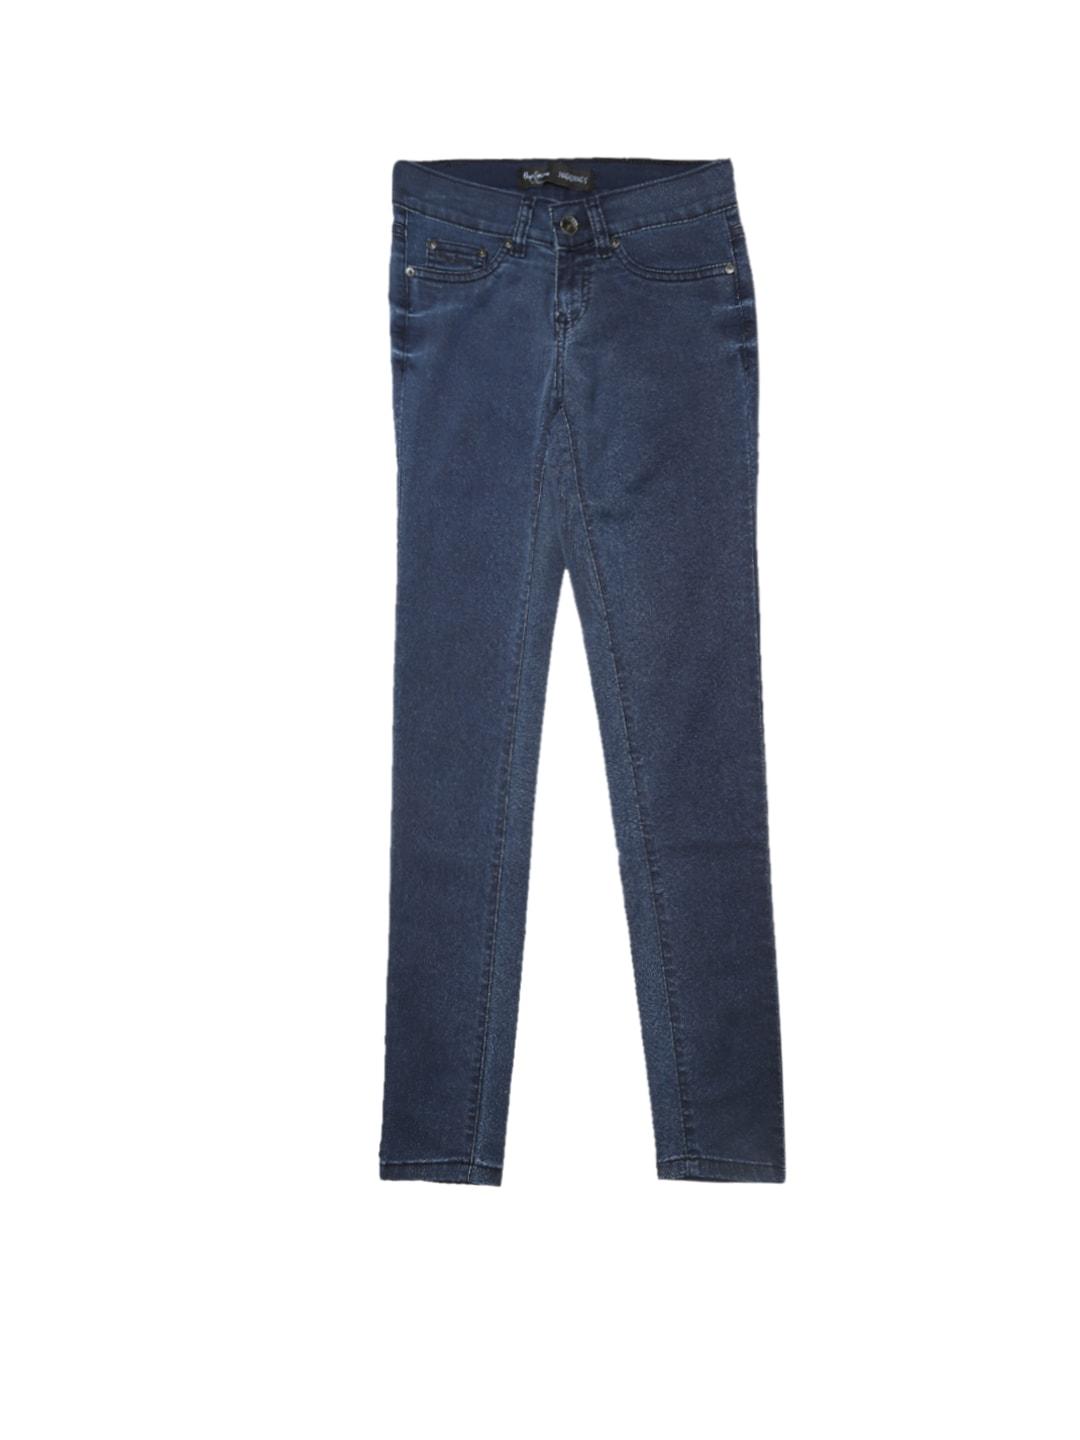 pepe-jeans-blue-jeggings